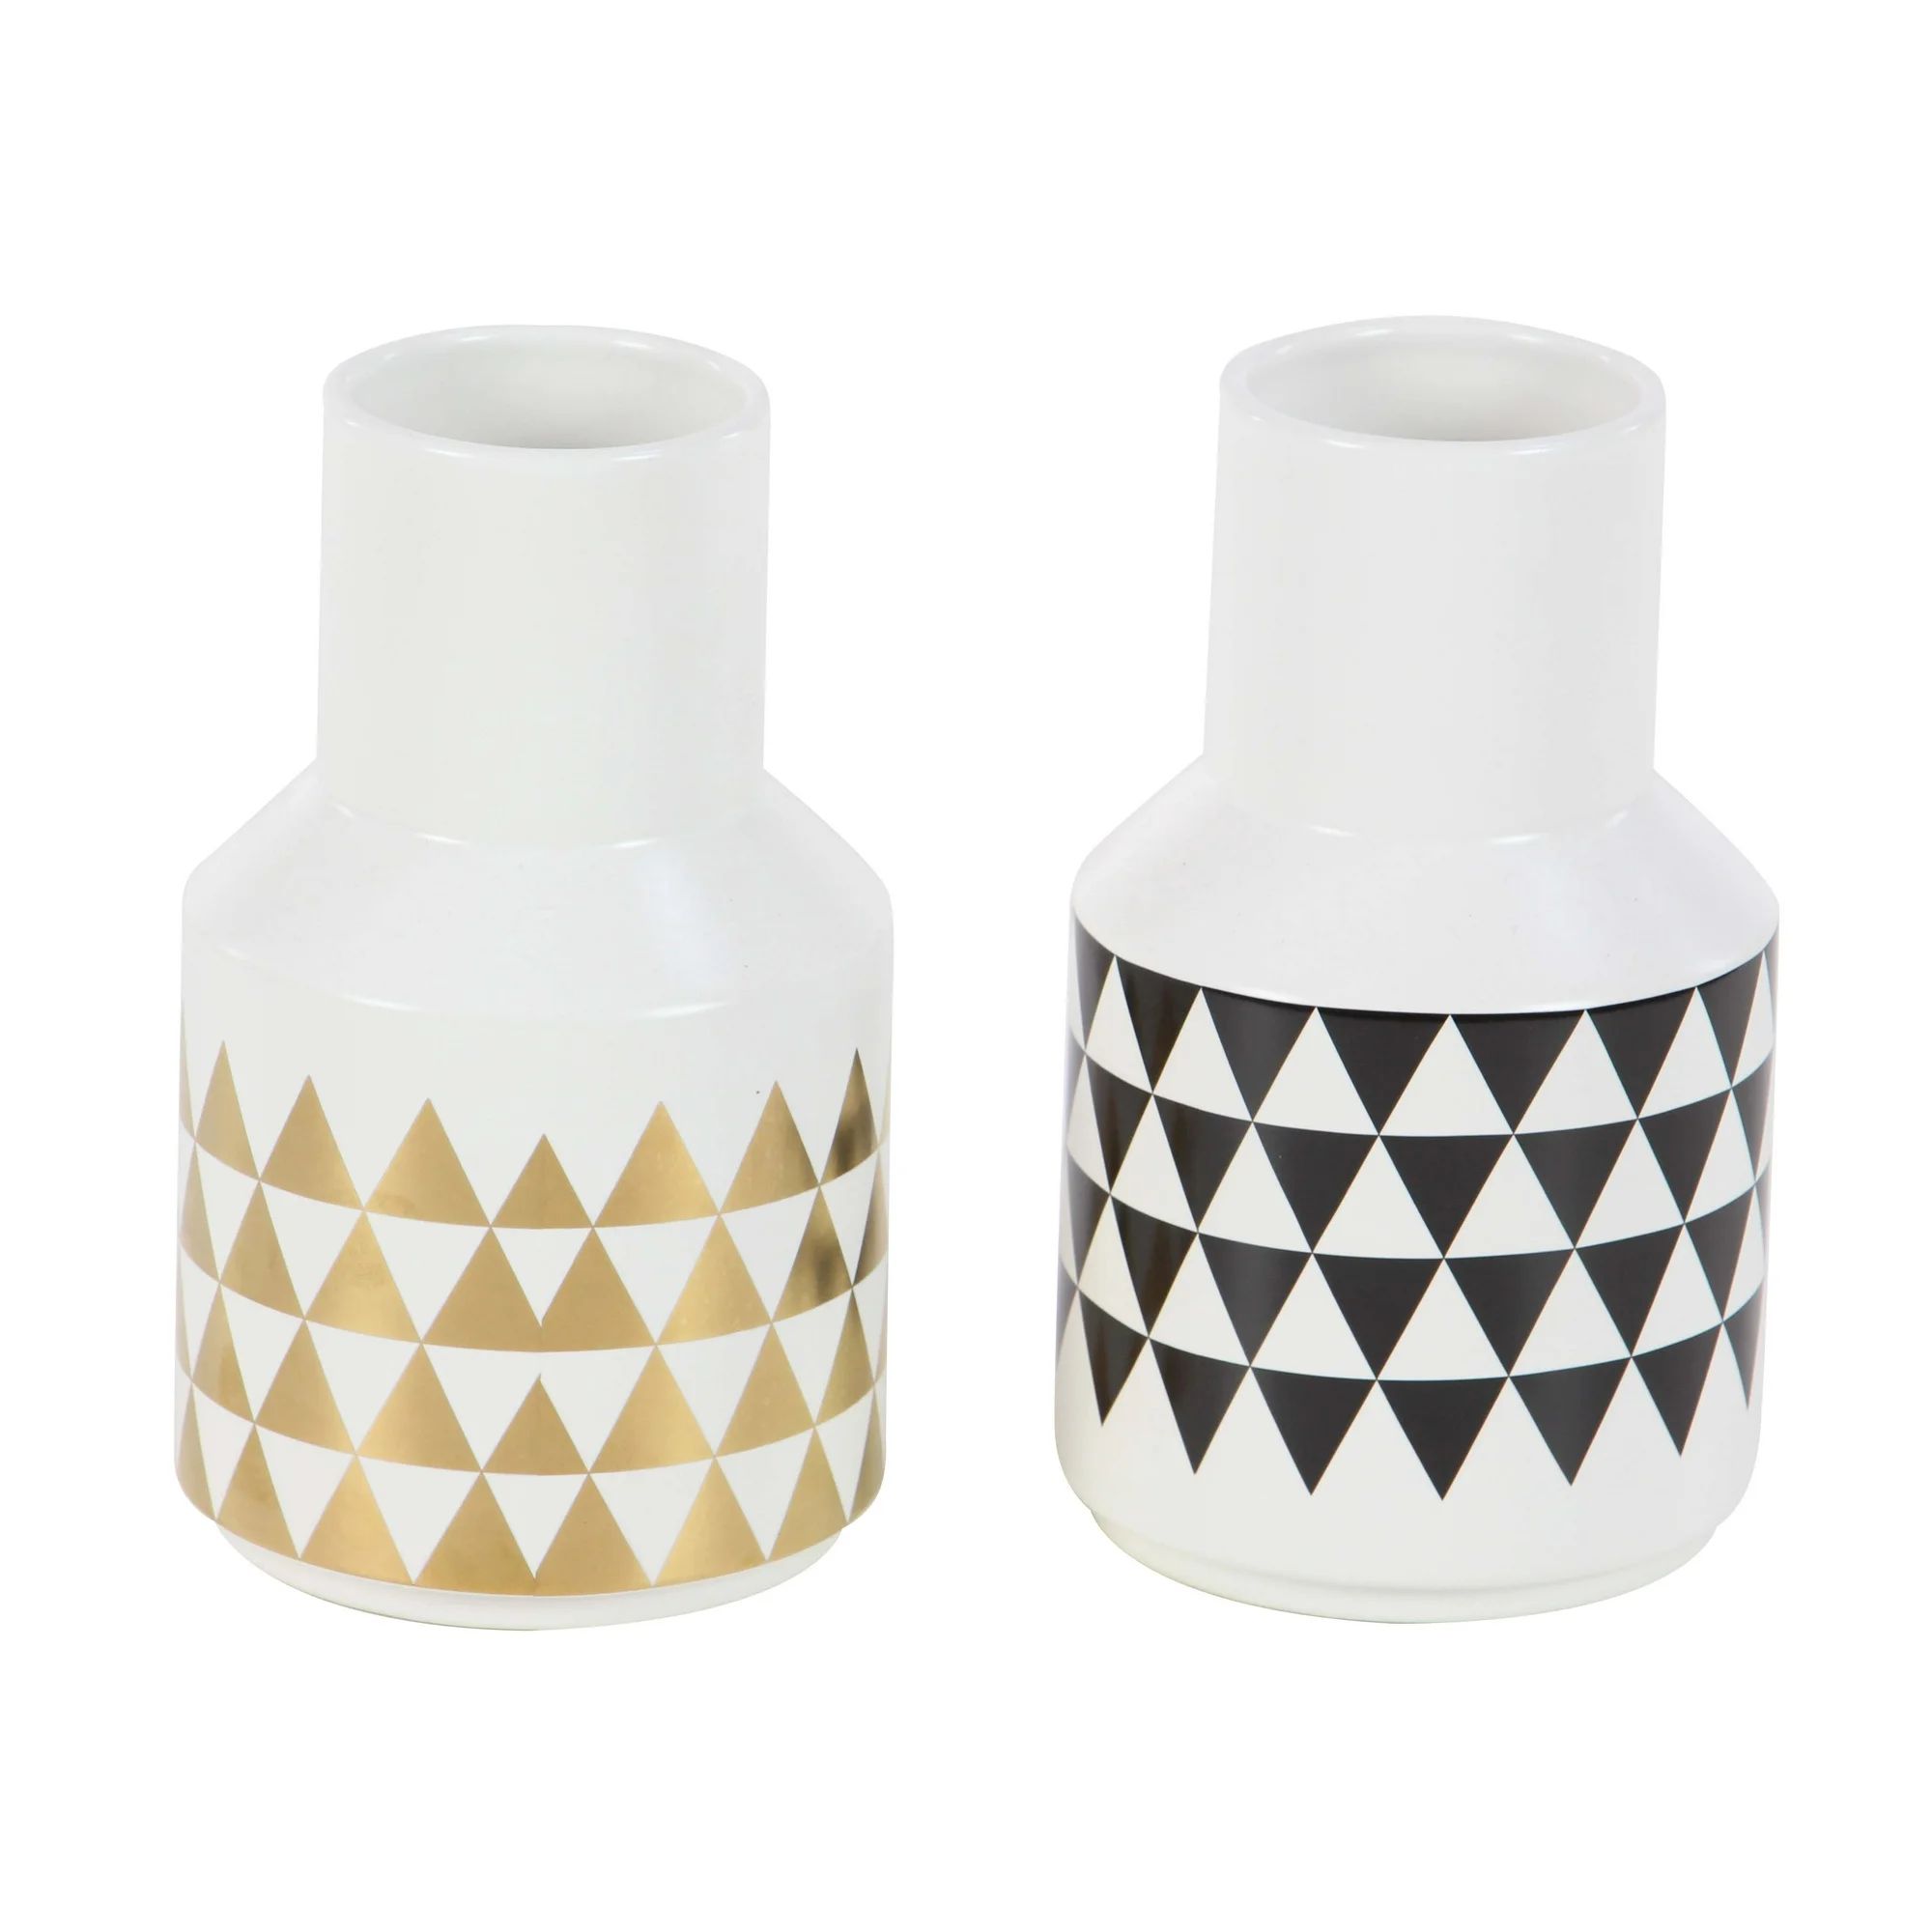 Decmode - Set of 2 modern 9 inch white ceramic bottle vases with black and gold triangle patterns | Walmart (US)